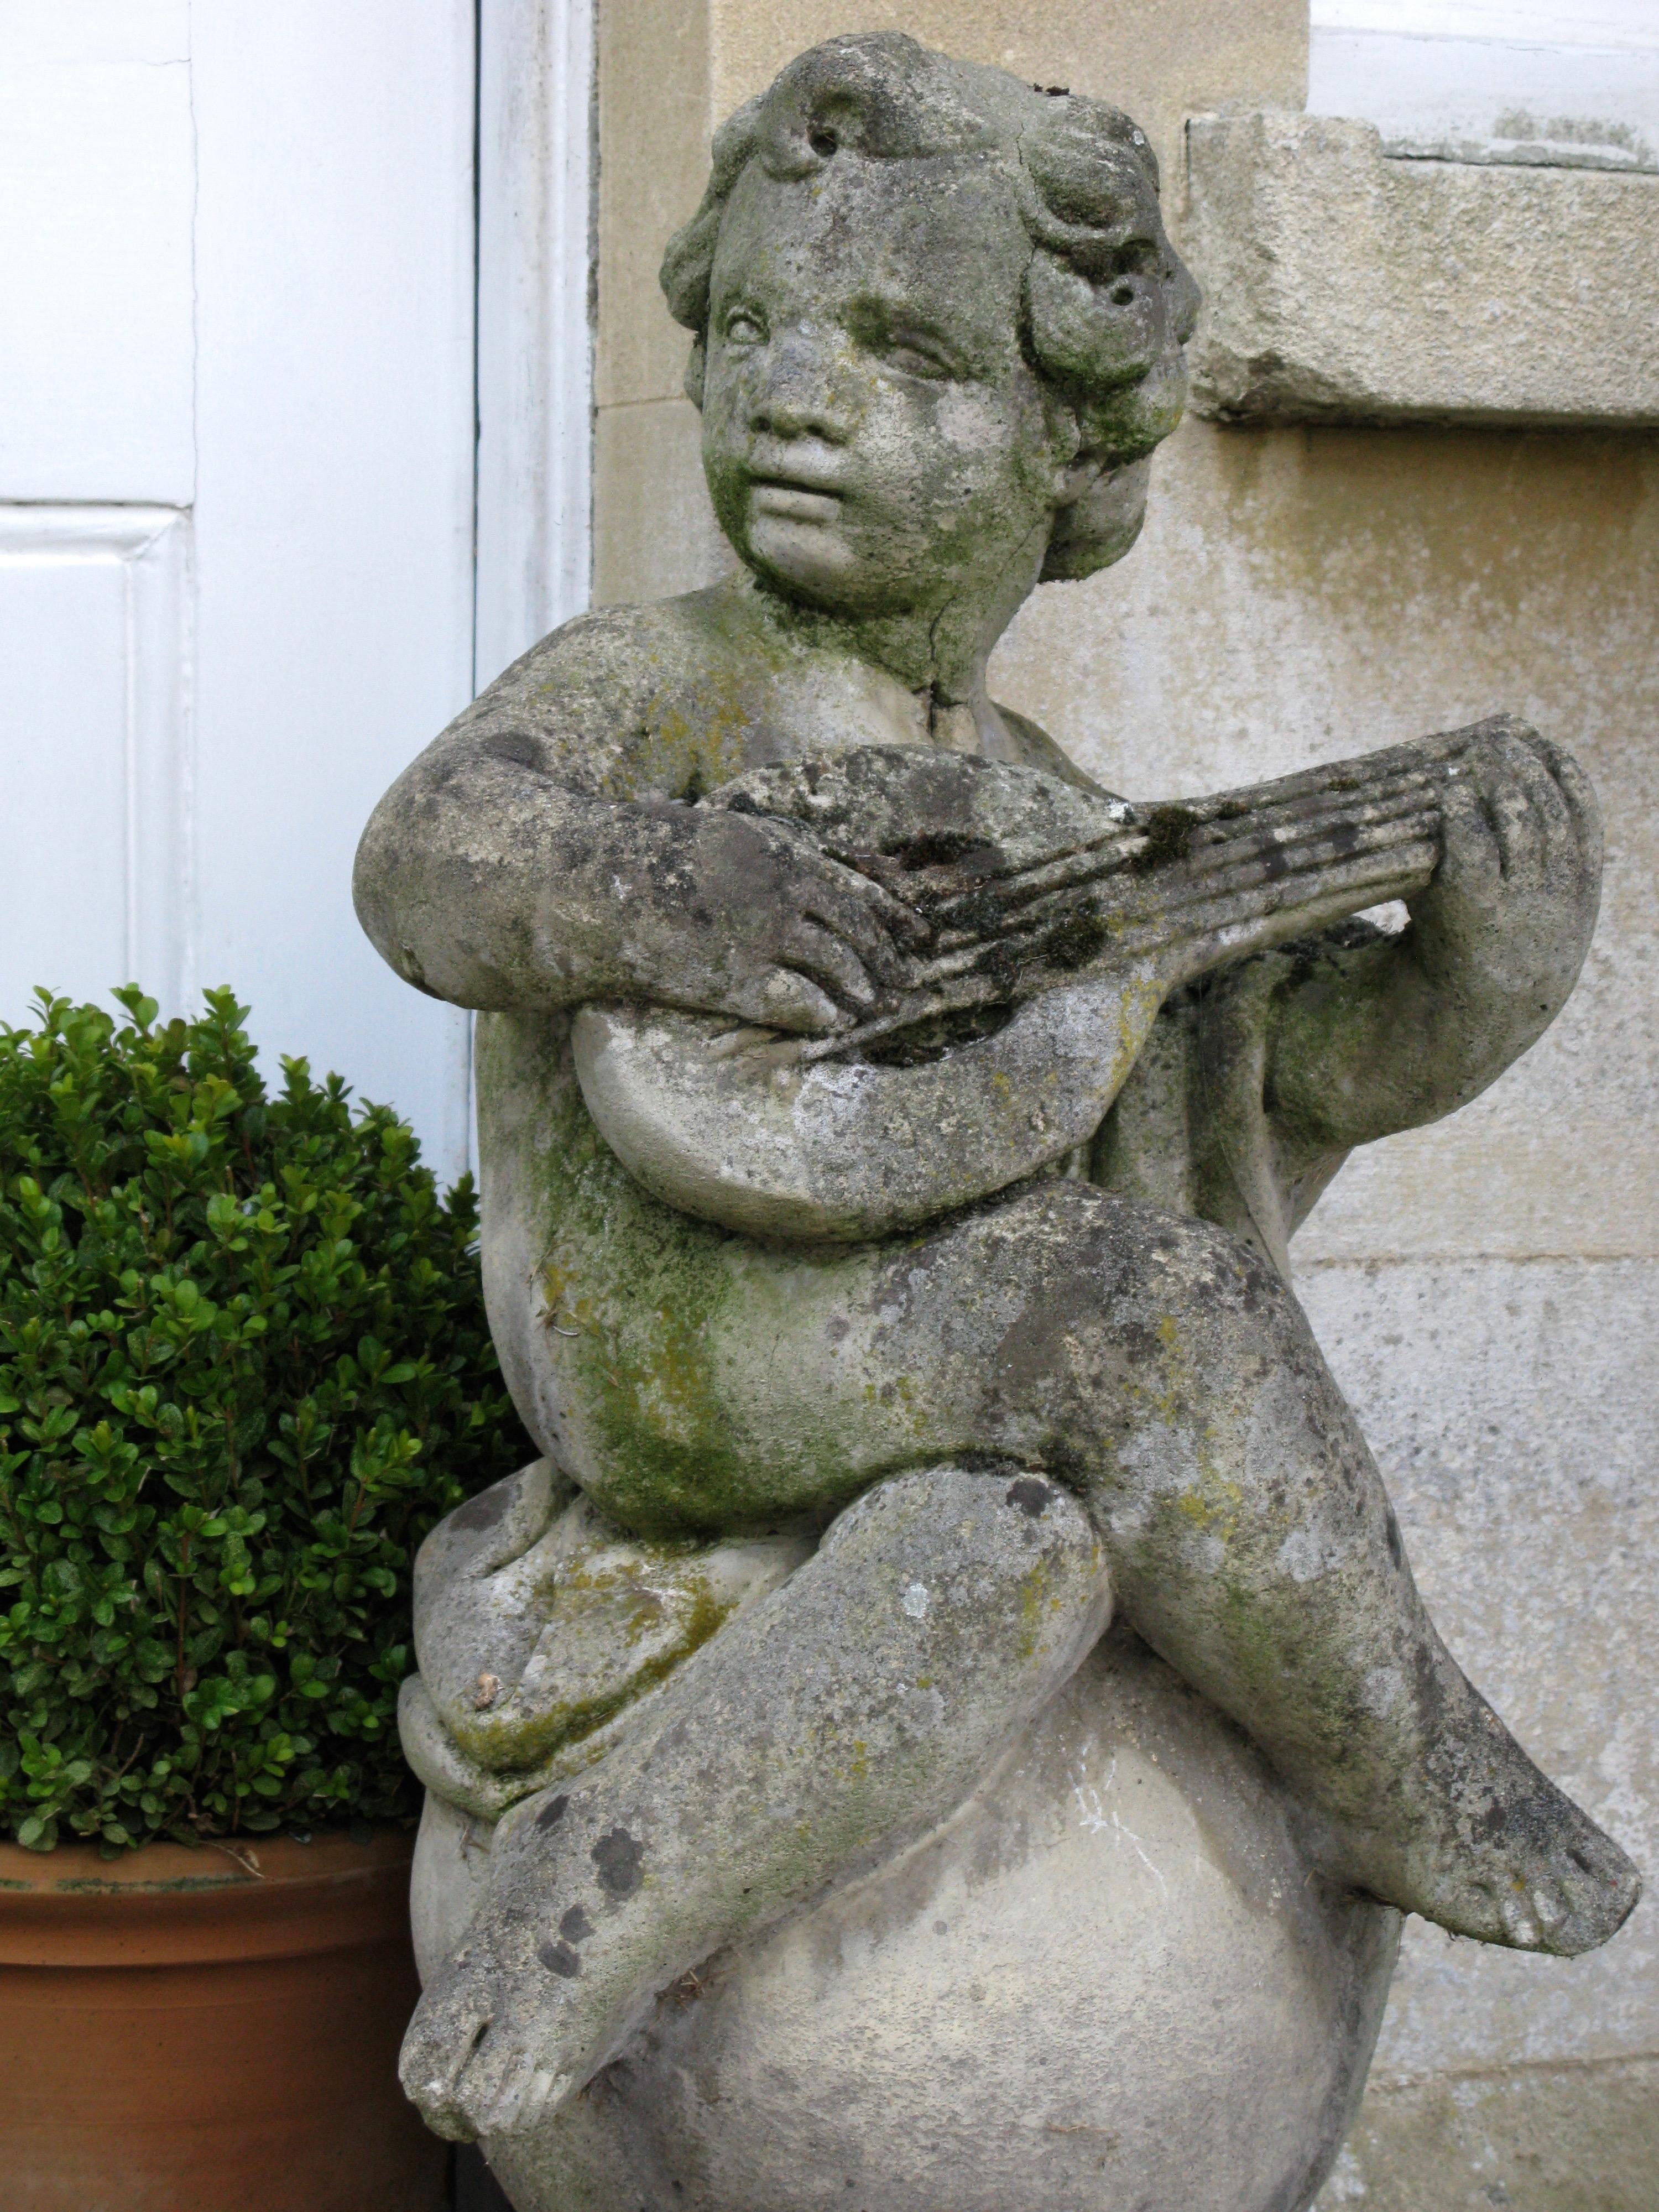 Lovely pair of cherubs with mandolin.
The pair has some damages, giving them that aged touch.

They are adorable and definitely giving you that positive energy that we all need so much at the moment in these uncertain times.

Word from the